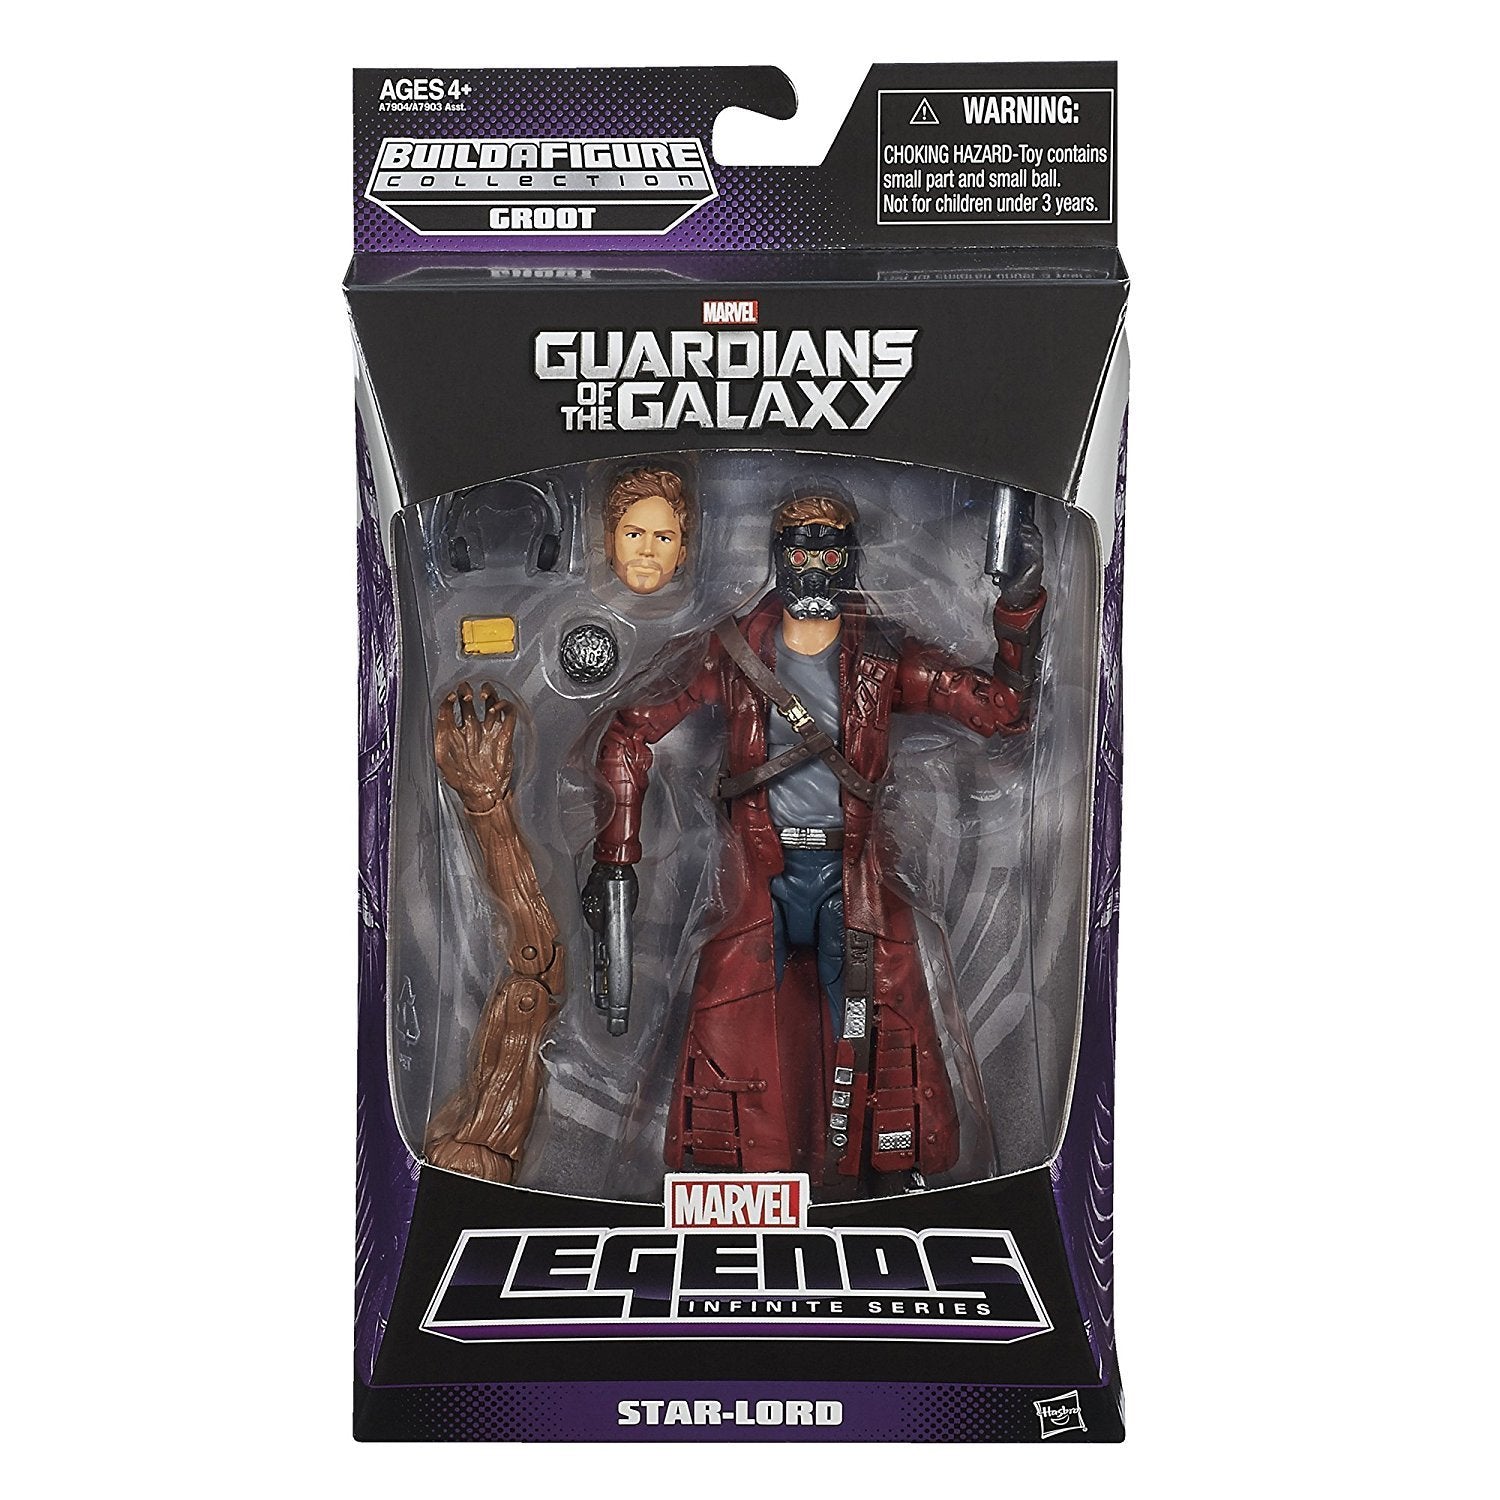 MARVEL GUARDIANS OF THE GALAXY LEGENDS SERIES STAR-LORD - Nerd Arena